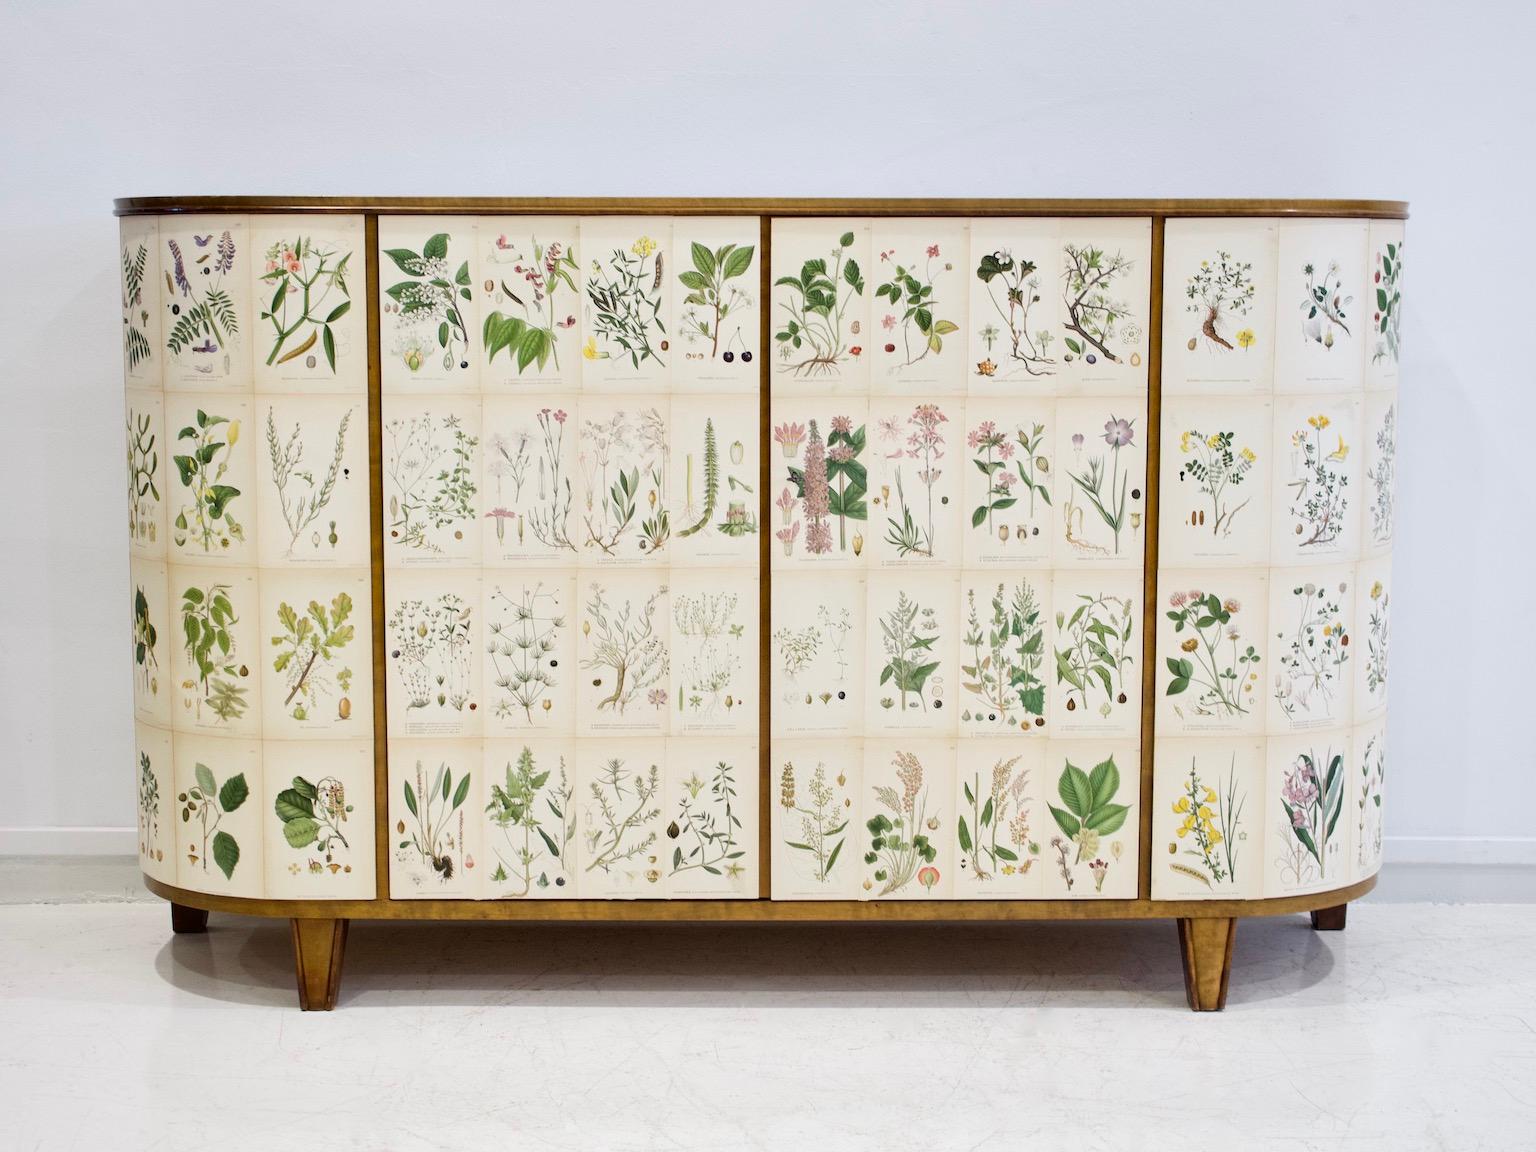 Swedish birch cabinet from the 1940s, later decorated with printed paper. The flower illustrations are from the book 